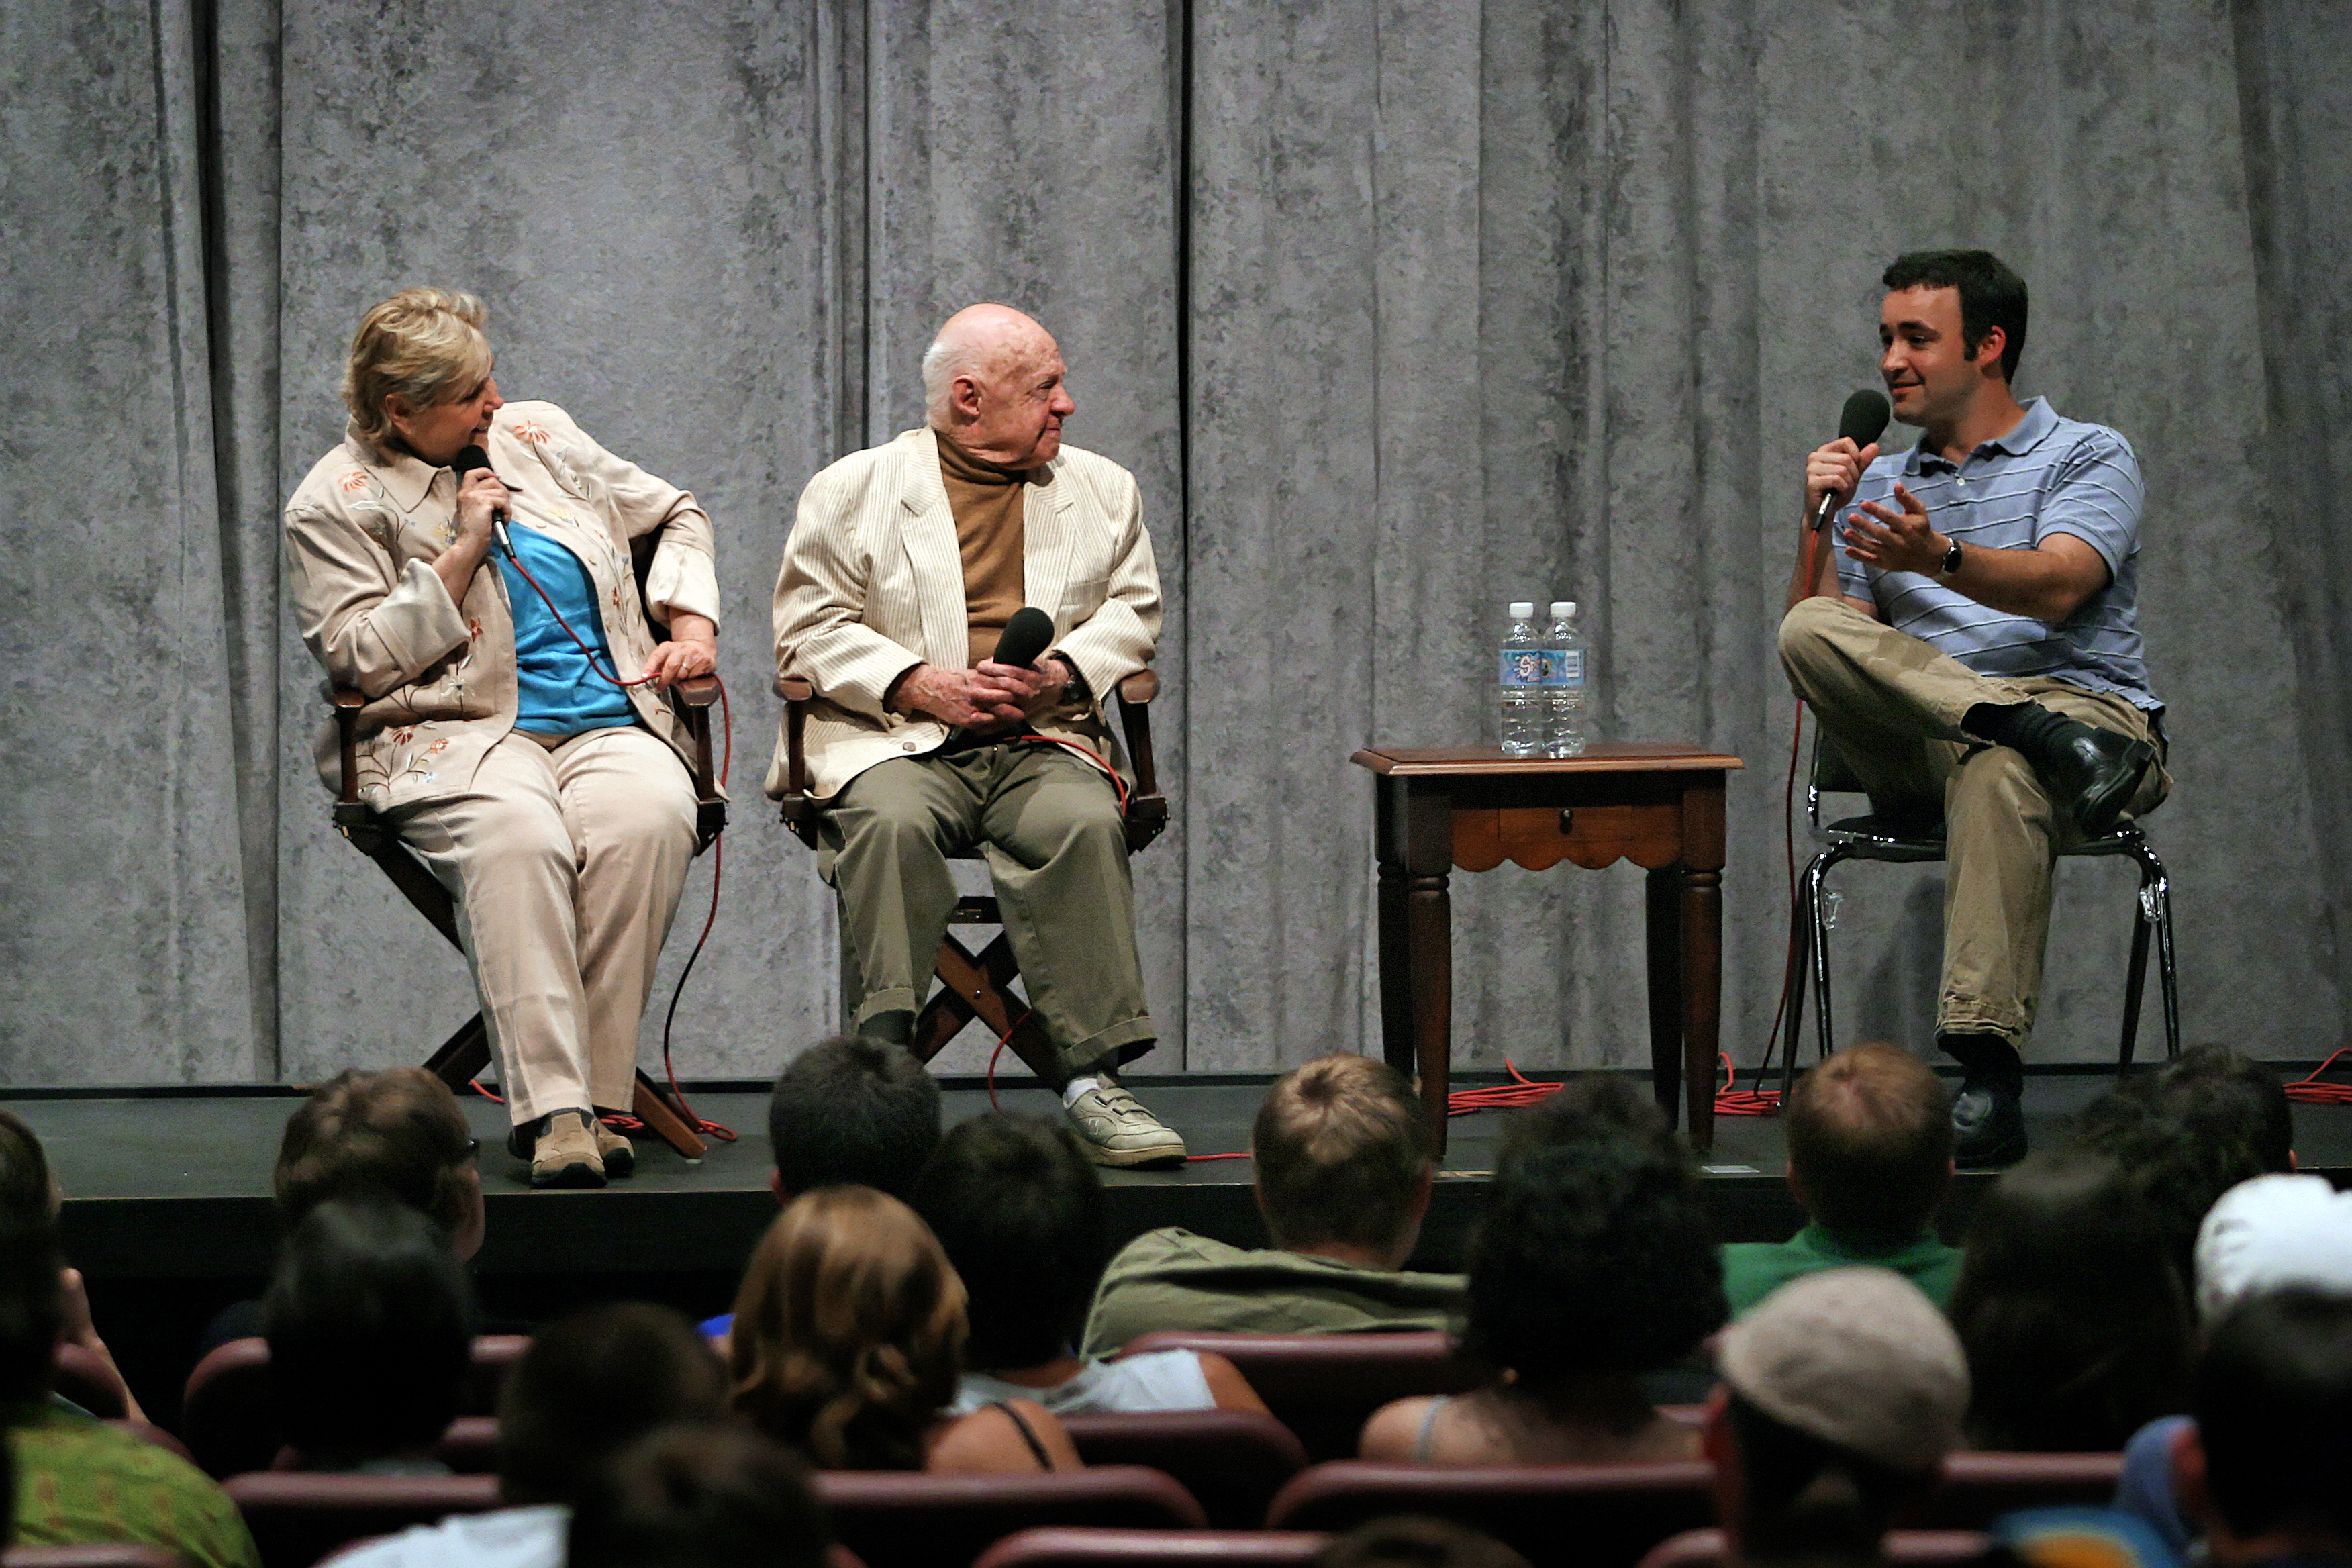 Director David Rotan speaking with Mickey Rooney and wife Jan Chamberlin Rooney during a Q&A appearance held at the North Carolina School of the Arts in Winston-Salem, NC, before filming 